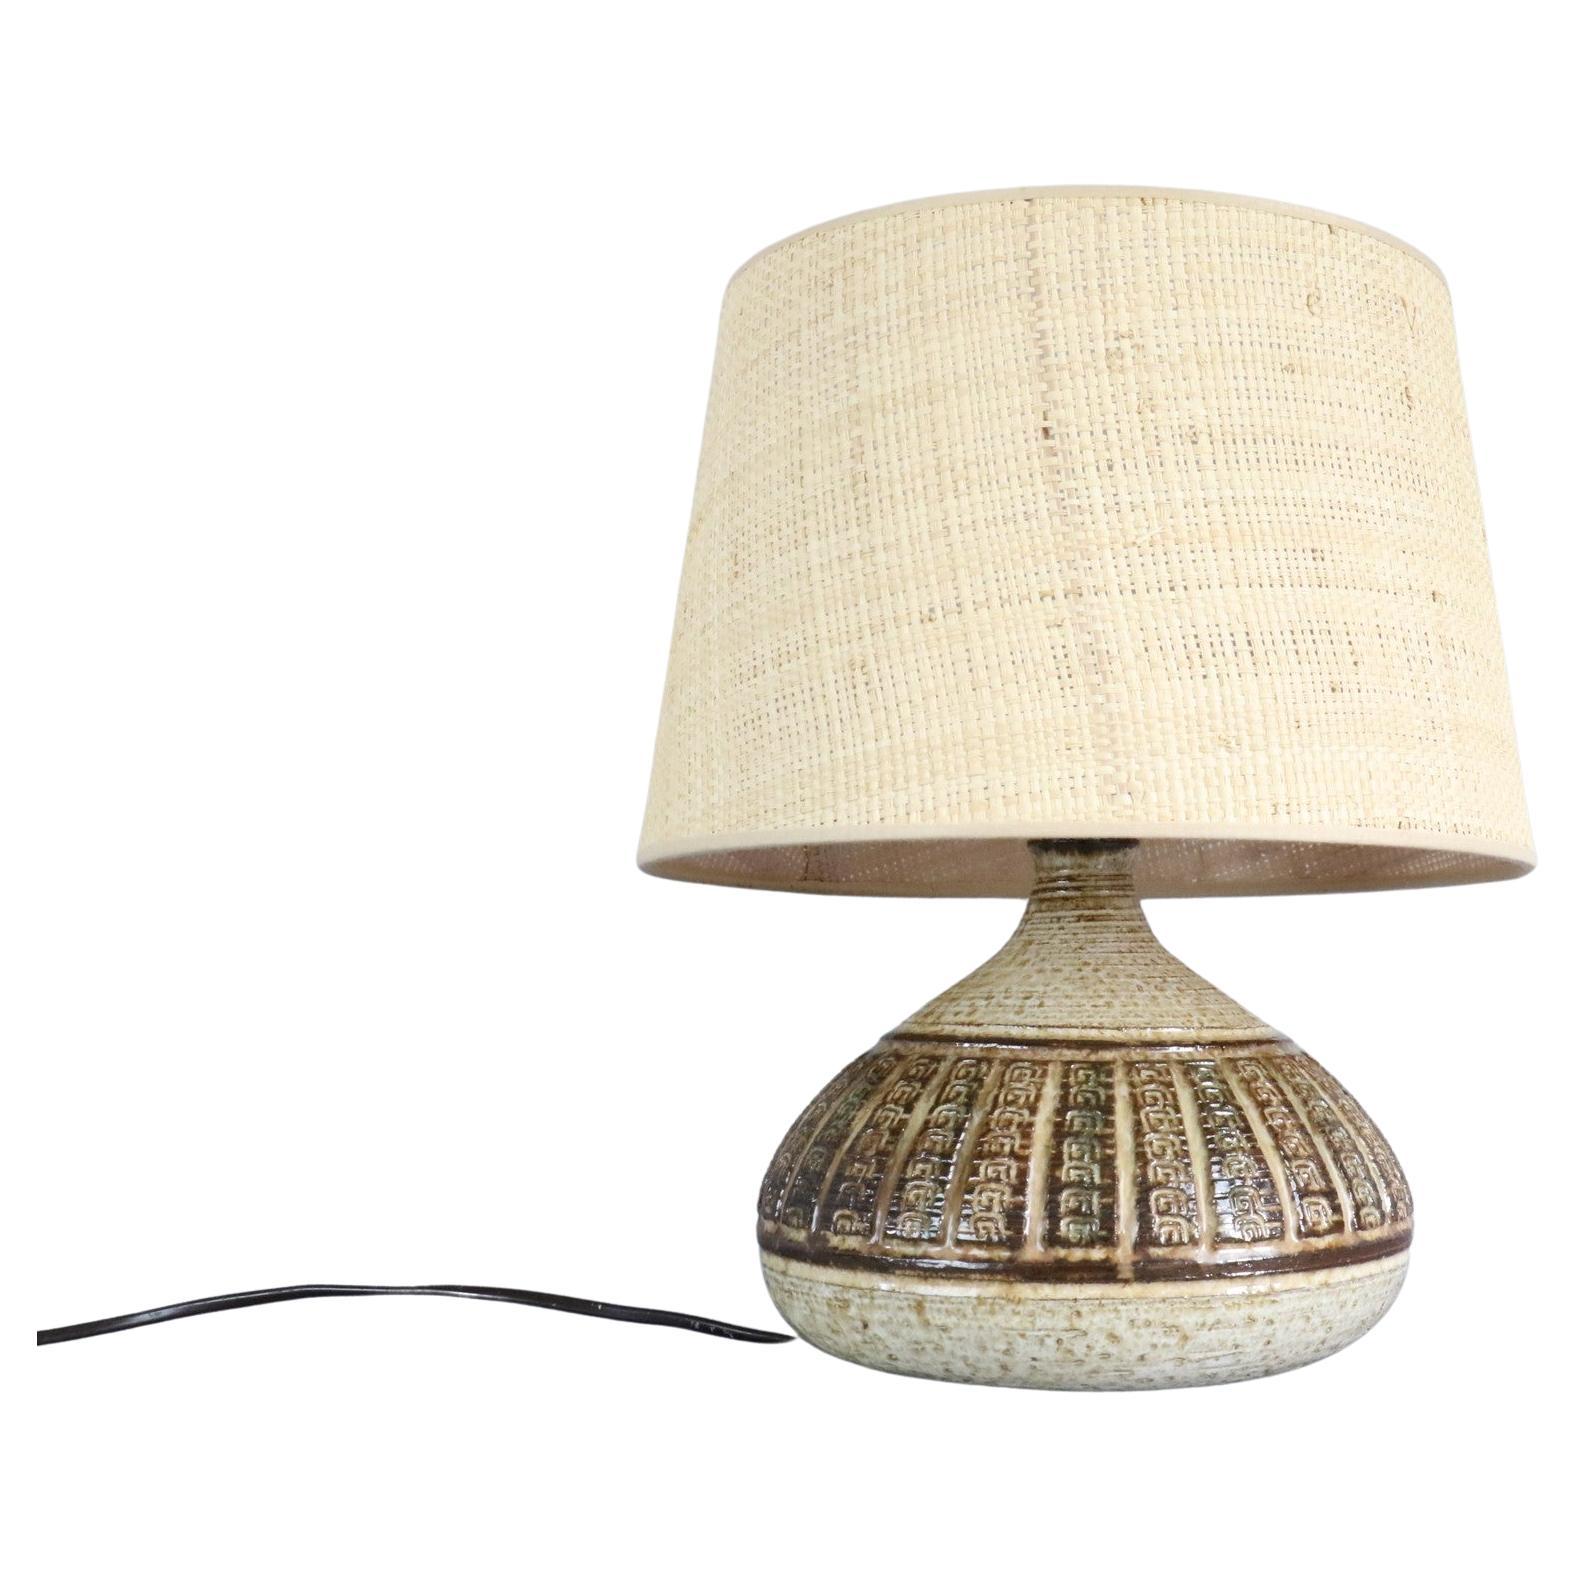 Midcentury French ceramic lamp by Marcel Giraud - Vallauris - 1960s.

It is a beautiful handcrafted table lamp both raw and elegant that can blend either in a country chic atmosphere or in a refined interior.
Enamaled and decorated with